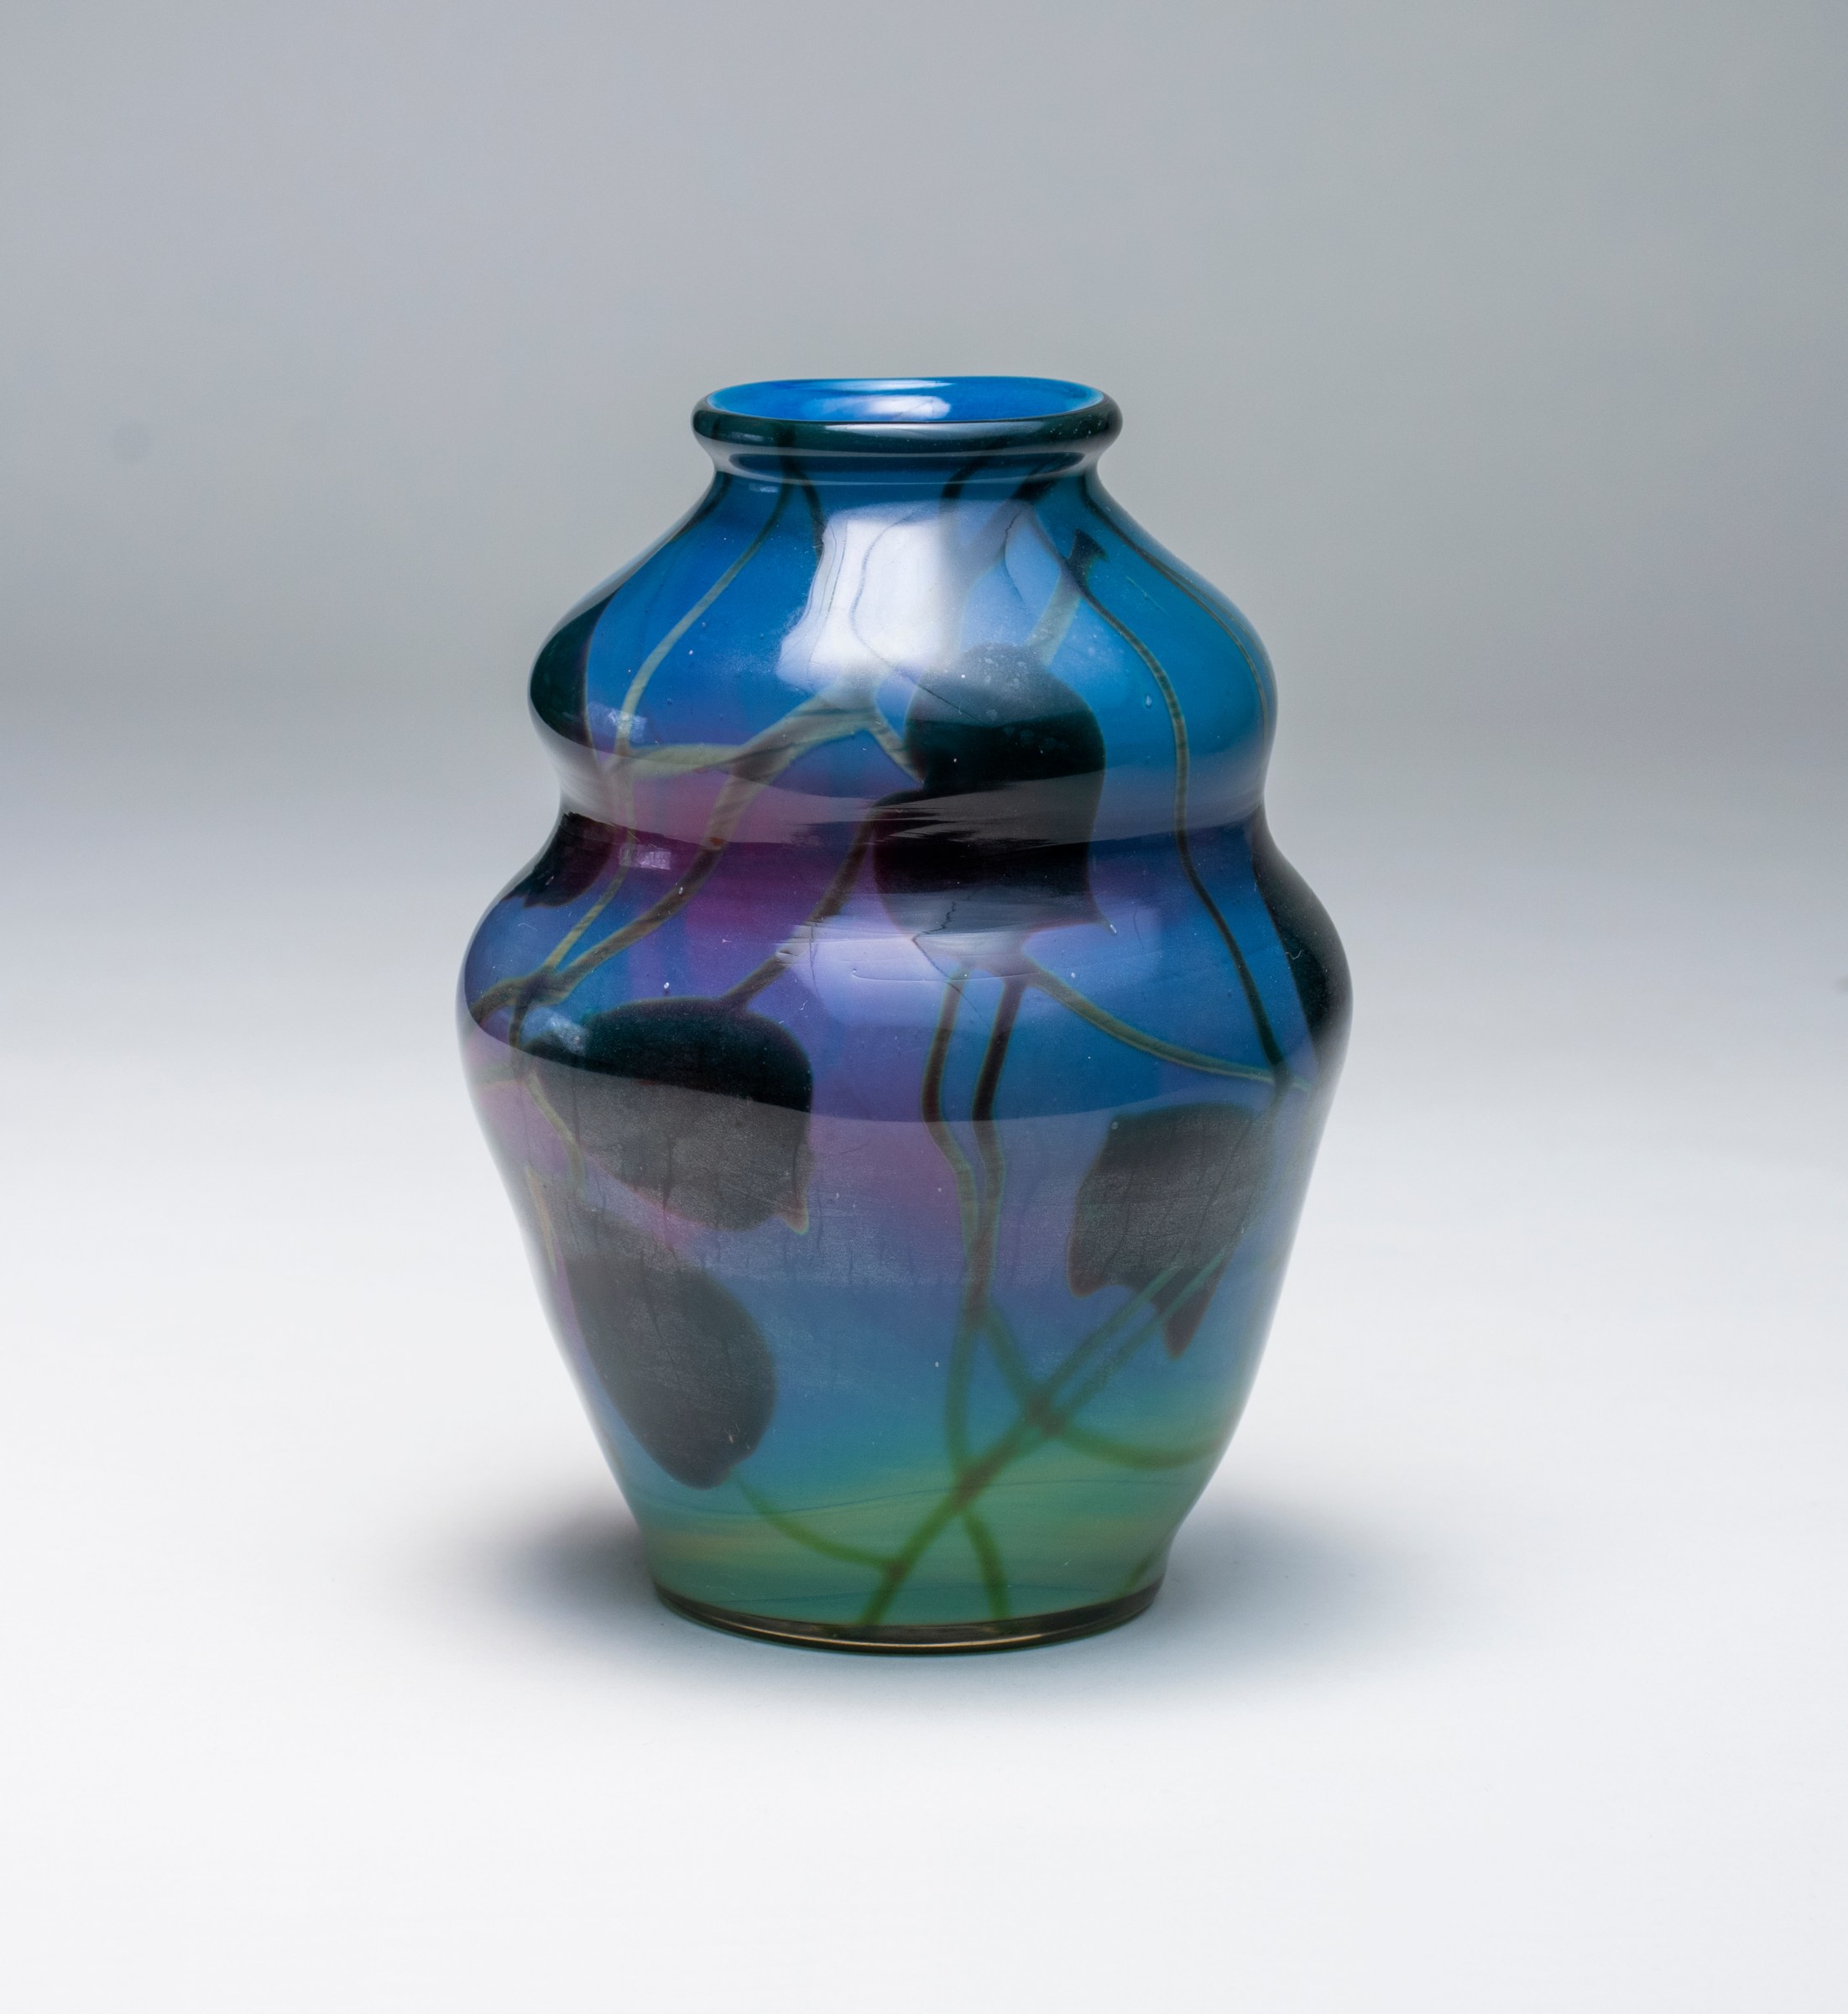 A tiffany favrile glass reactive paperweight style vase, the blue double gourd shaped body shifting in color and opacity as you move around the vase, decorated with all over motif of swirling vines and heart shaped leaves in a dark green glass. The vase appears to glow purple in transmitted light.